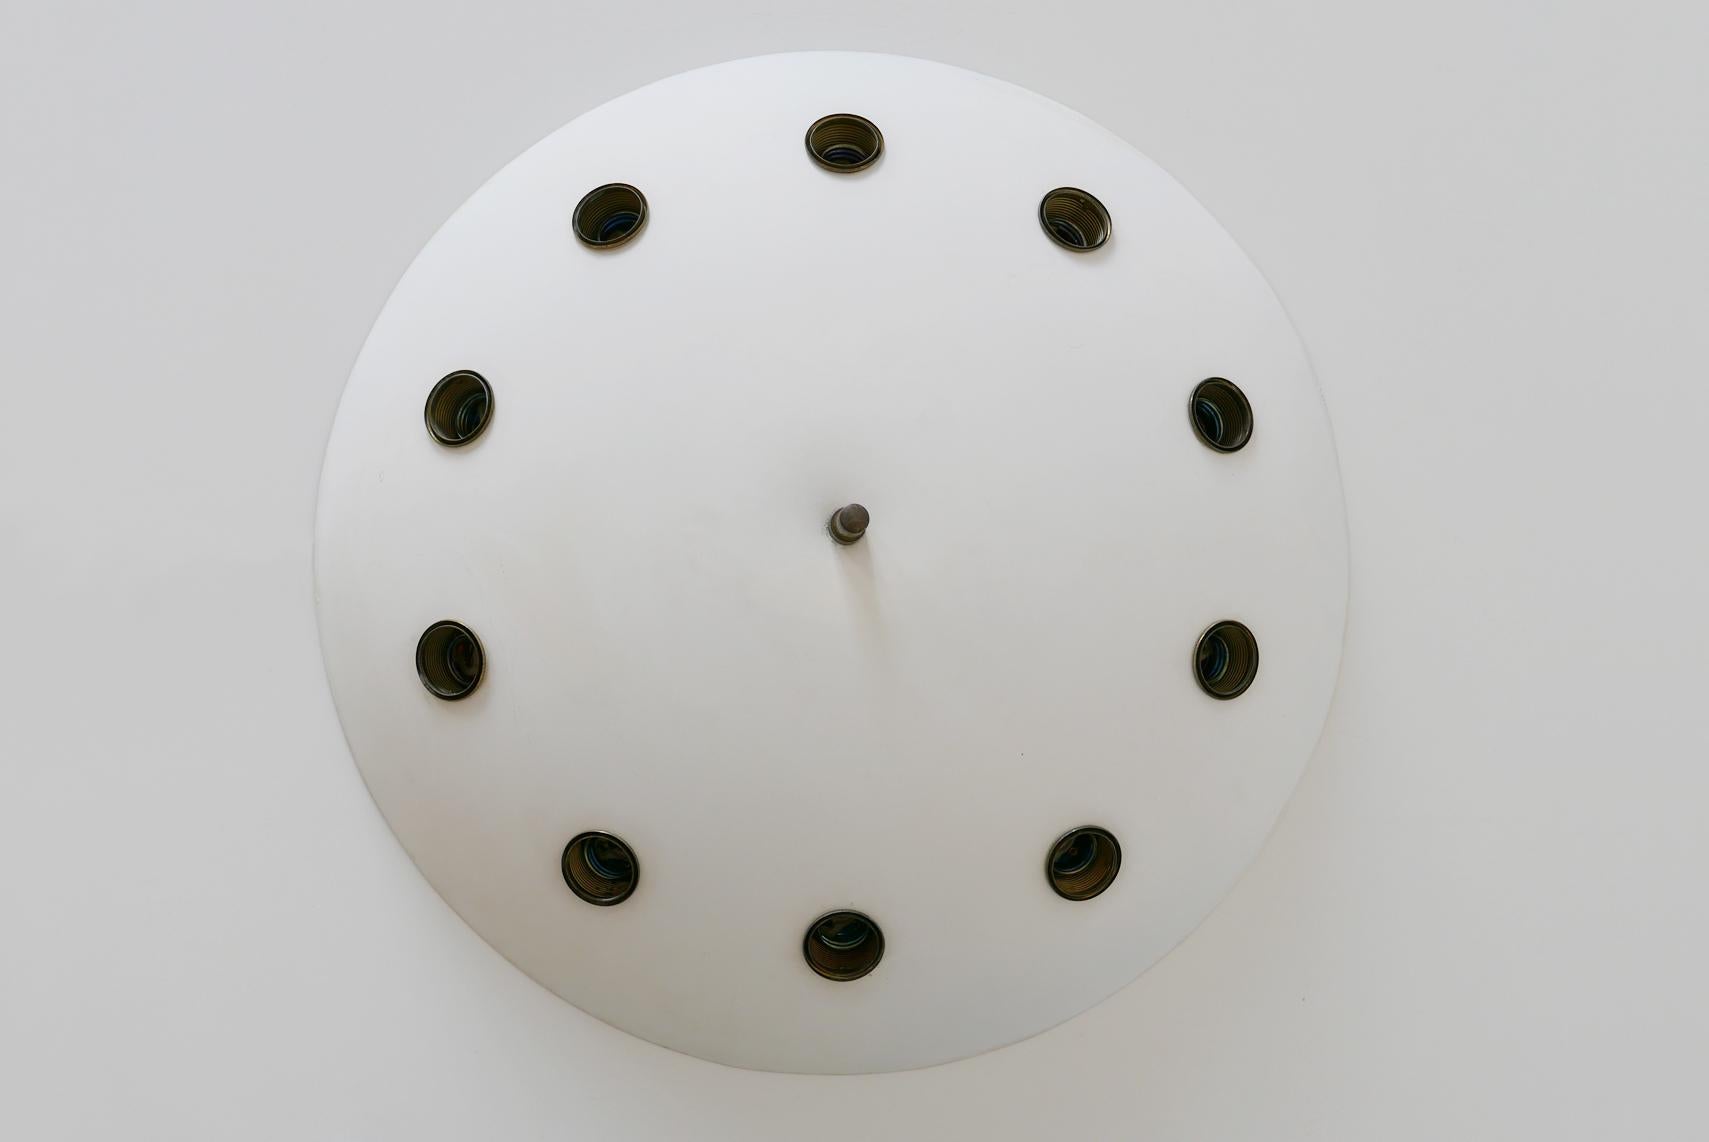 Exceptional Mid-Century Modern Sputnik flush mount or ceiling fixture. Designed probably by Oscar Torlasco for Lumi, 1950s, Italy.

Executed in white lacquered aluminum, the ceiling fixture needs 10 x E27 Edison screw fit bulbs, is re-wired, and in